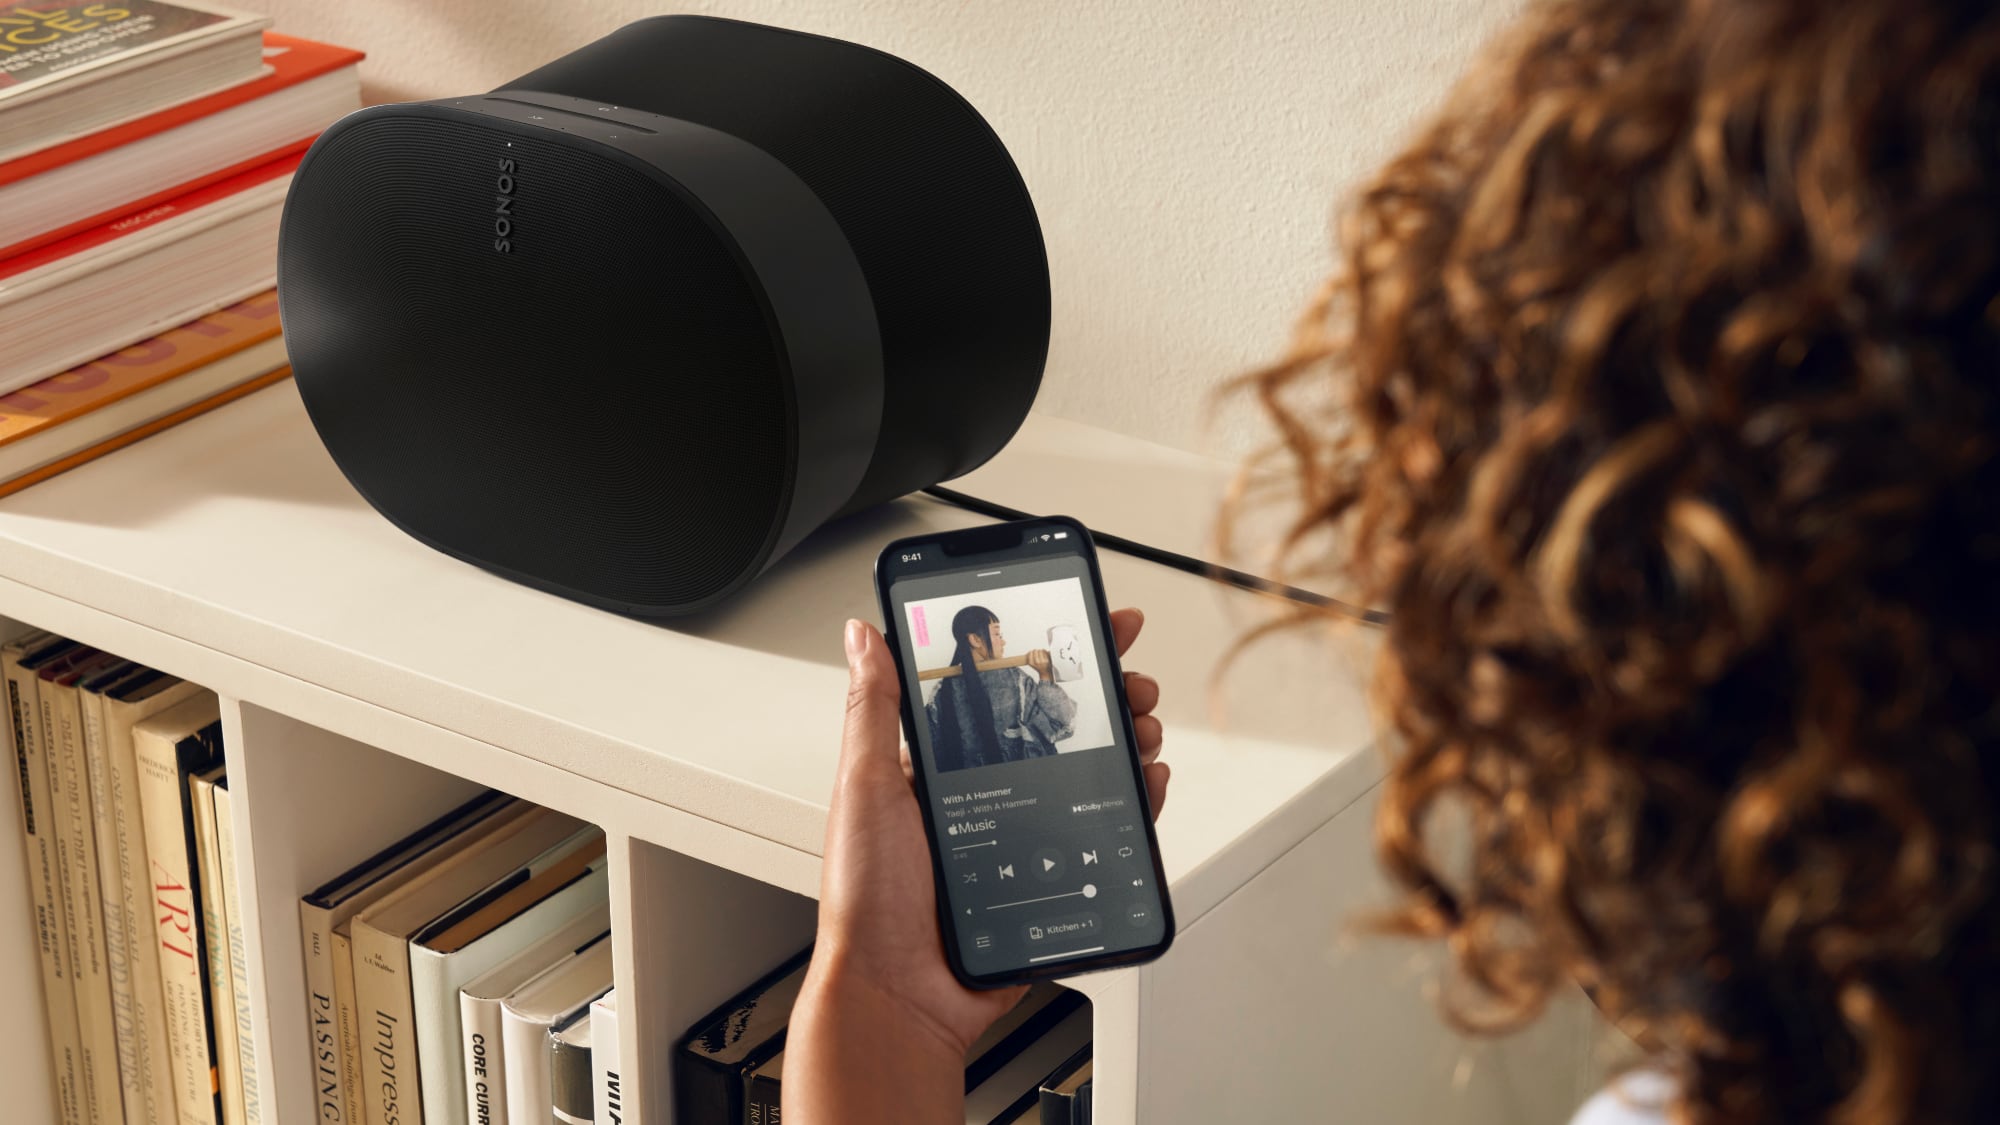 Sonos Said Rolling Out Widely Criticized App Redesign Took 'Courage'